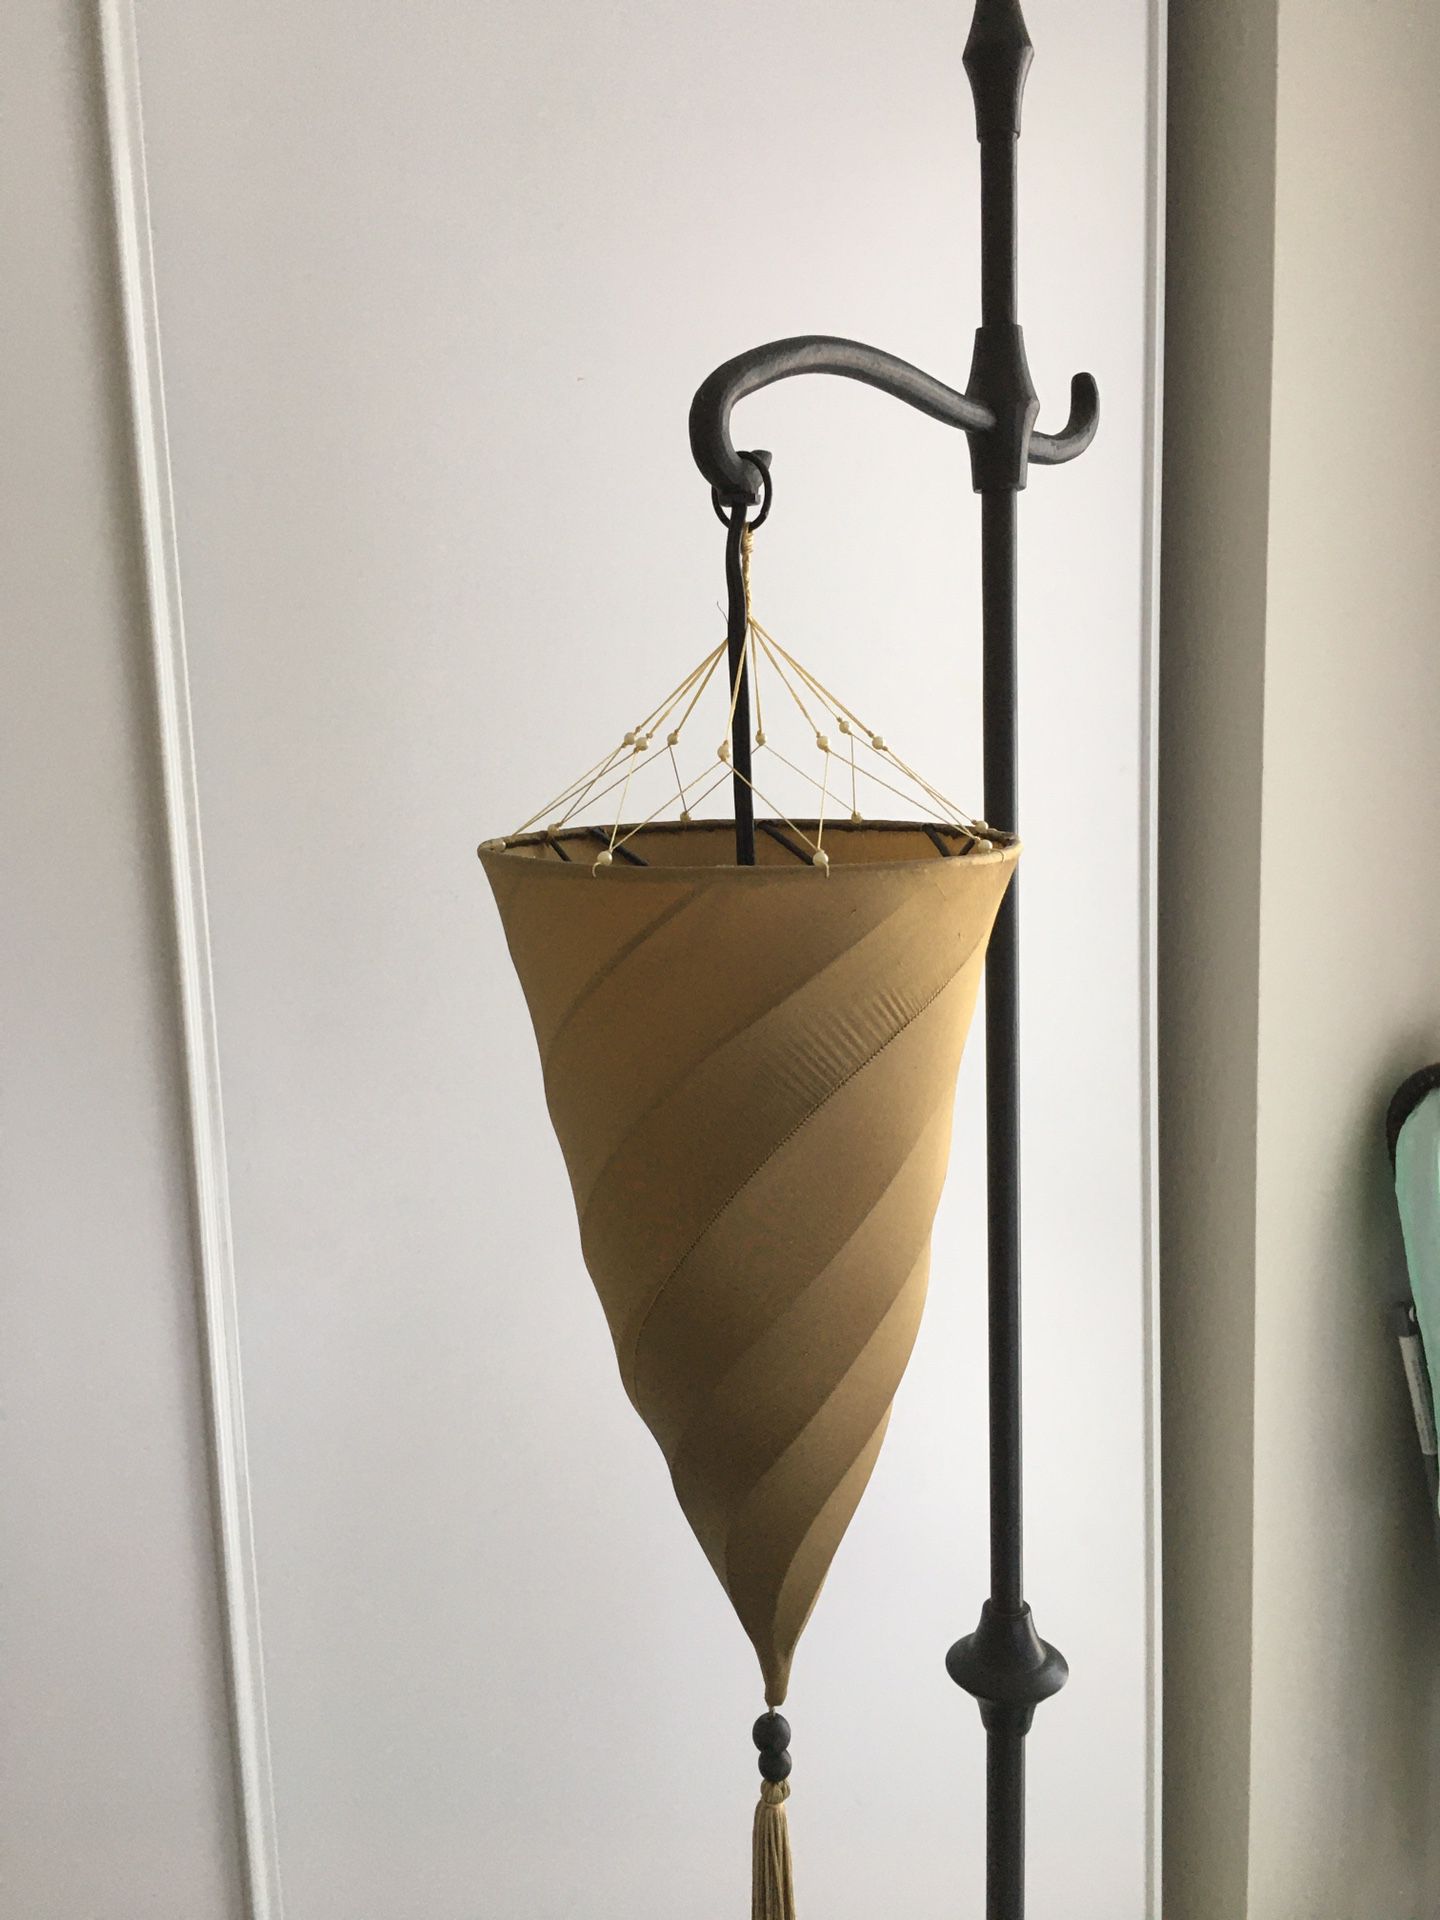 Pretty lamp from pottery barn